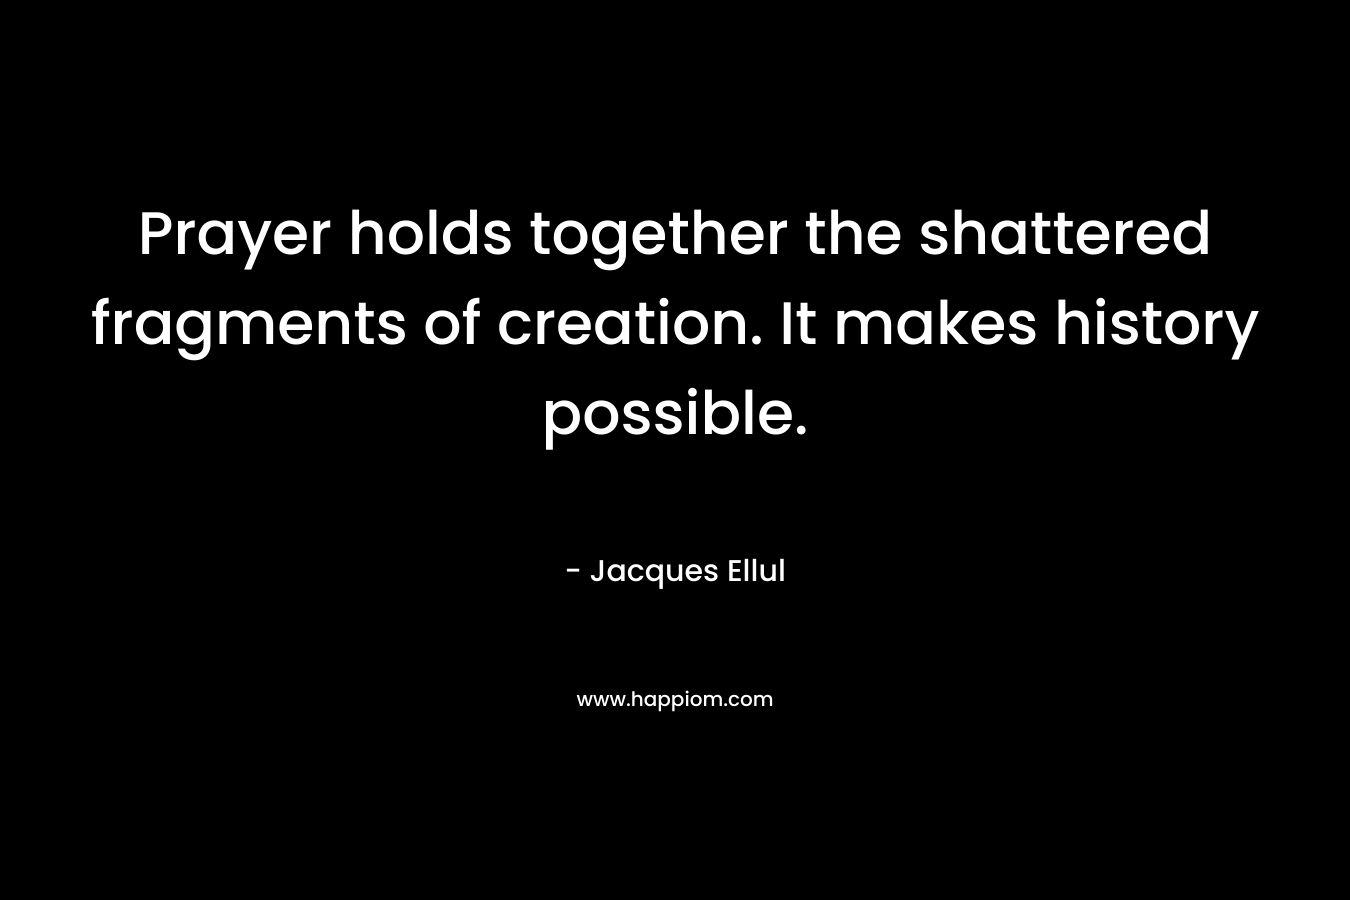 Prayer holds together the shattered fragments of creation. It makes history possible. – Jacques Ellul